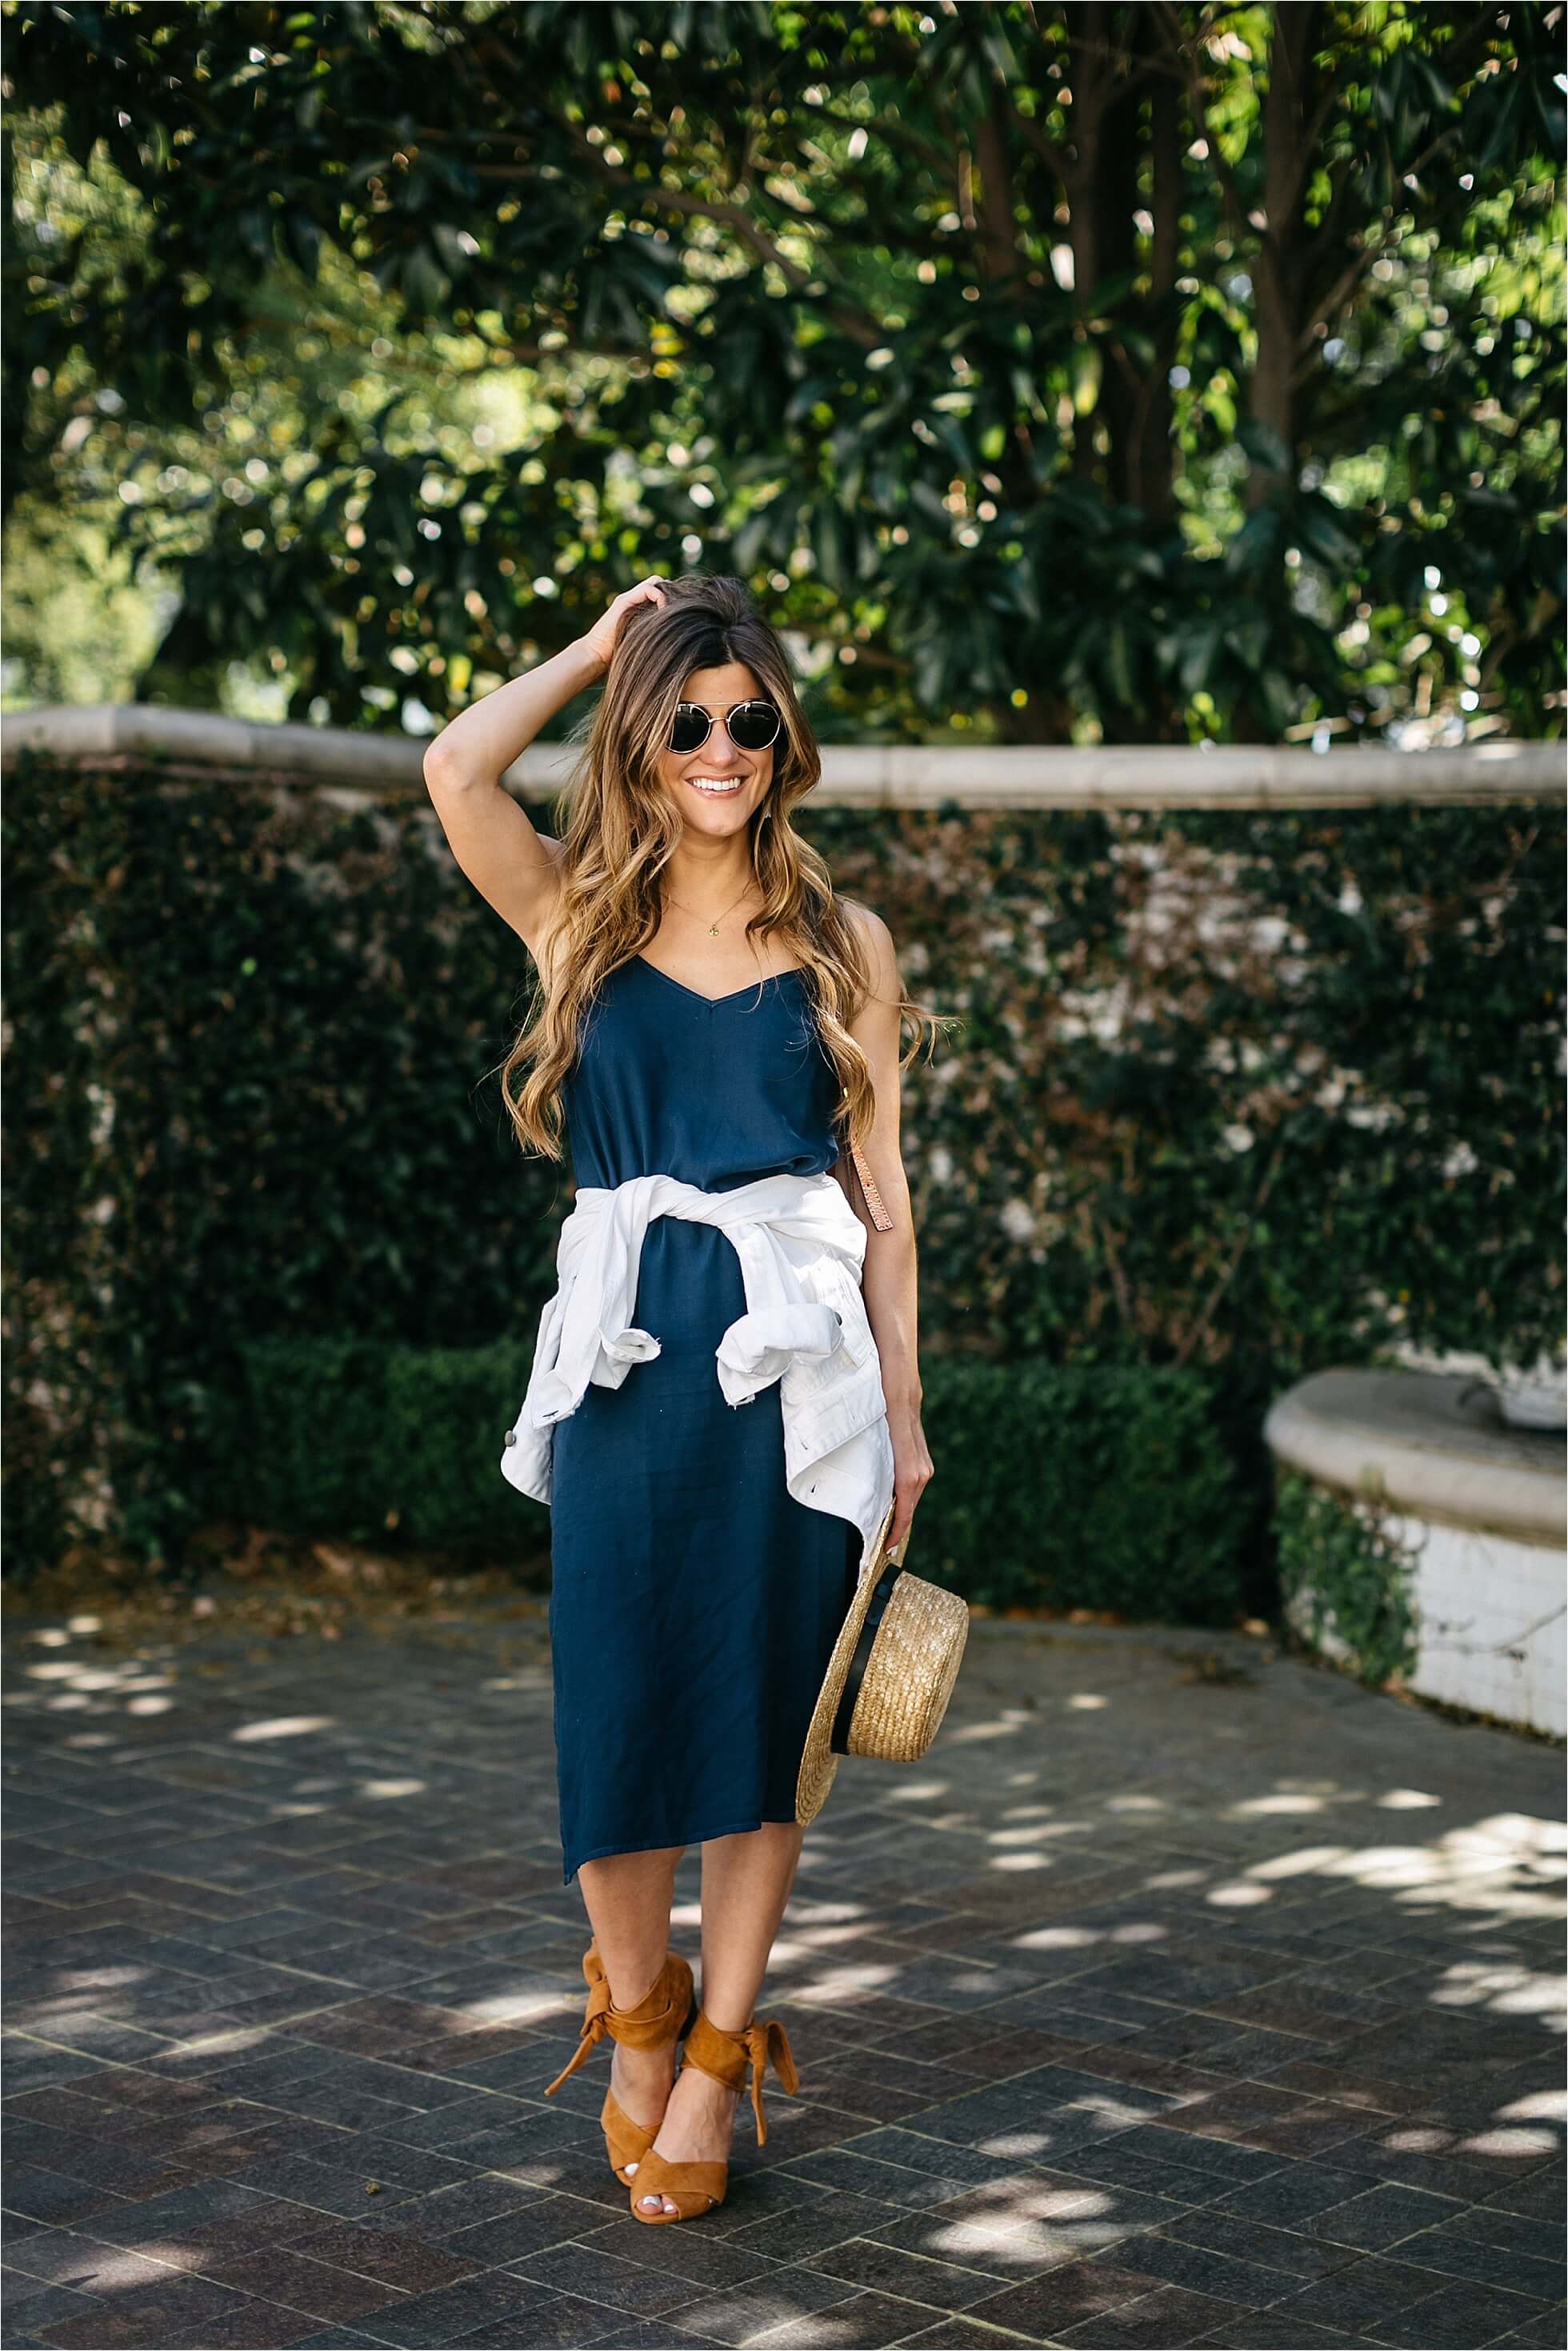 how to style a slip dress, splendid navy midi slip dress, cognac suede shoes, boater hat, chloe drew bag, spring outfit, jacket tied around waist